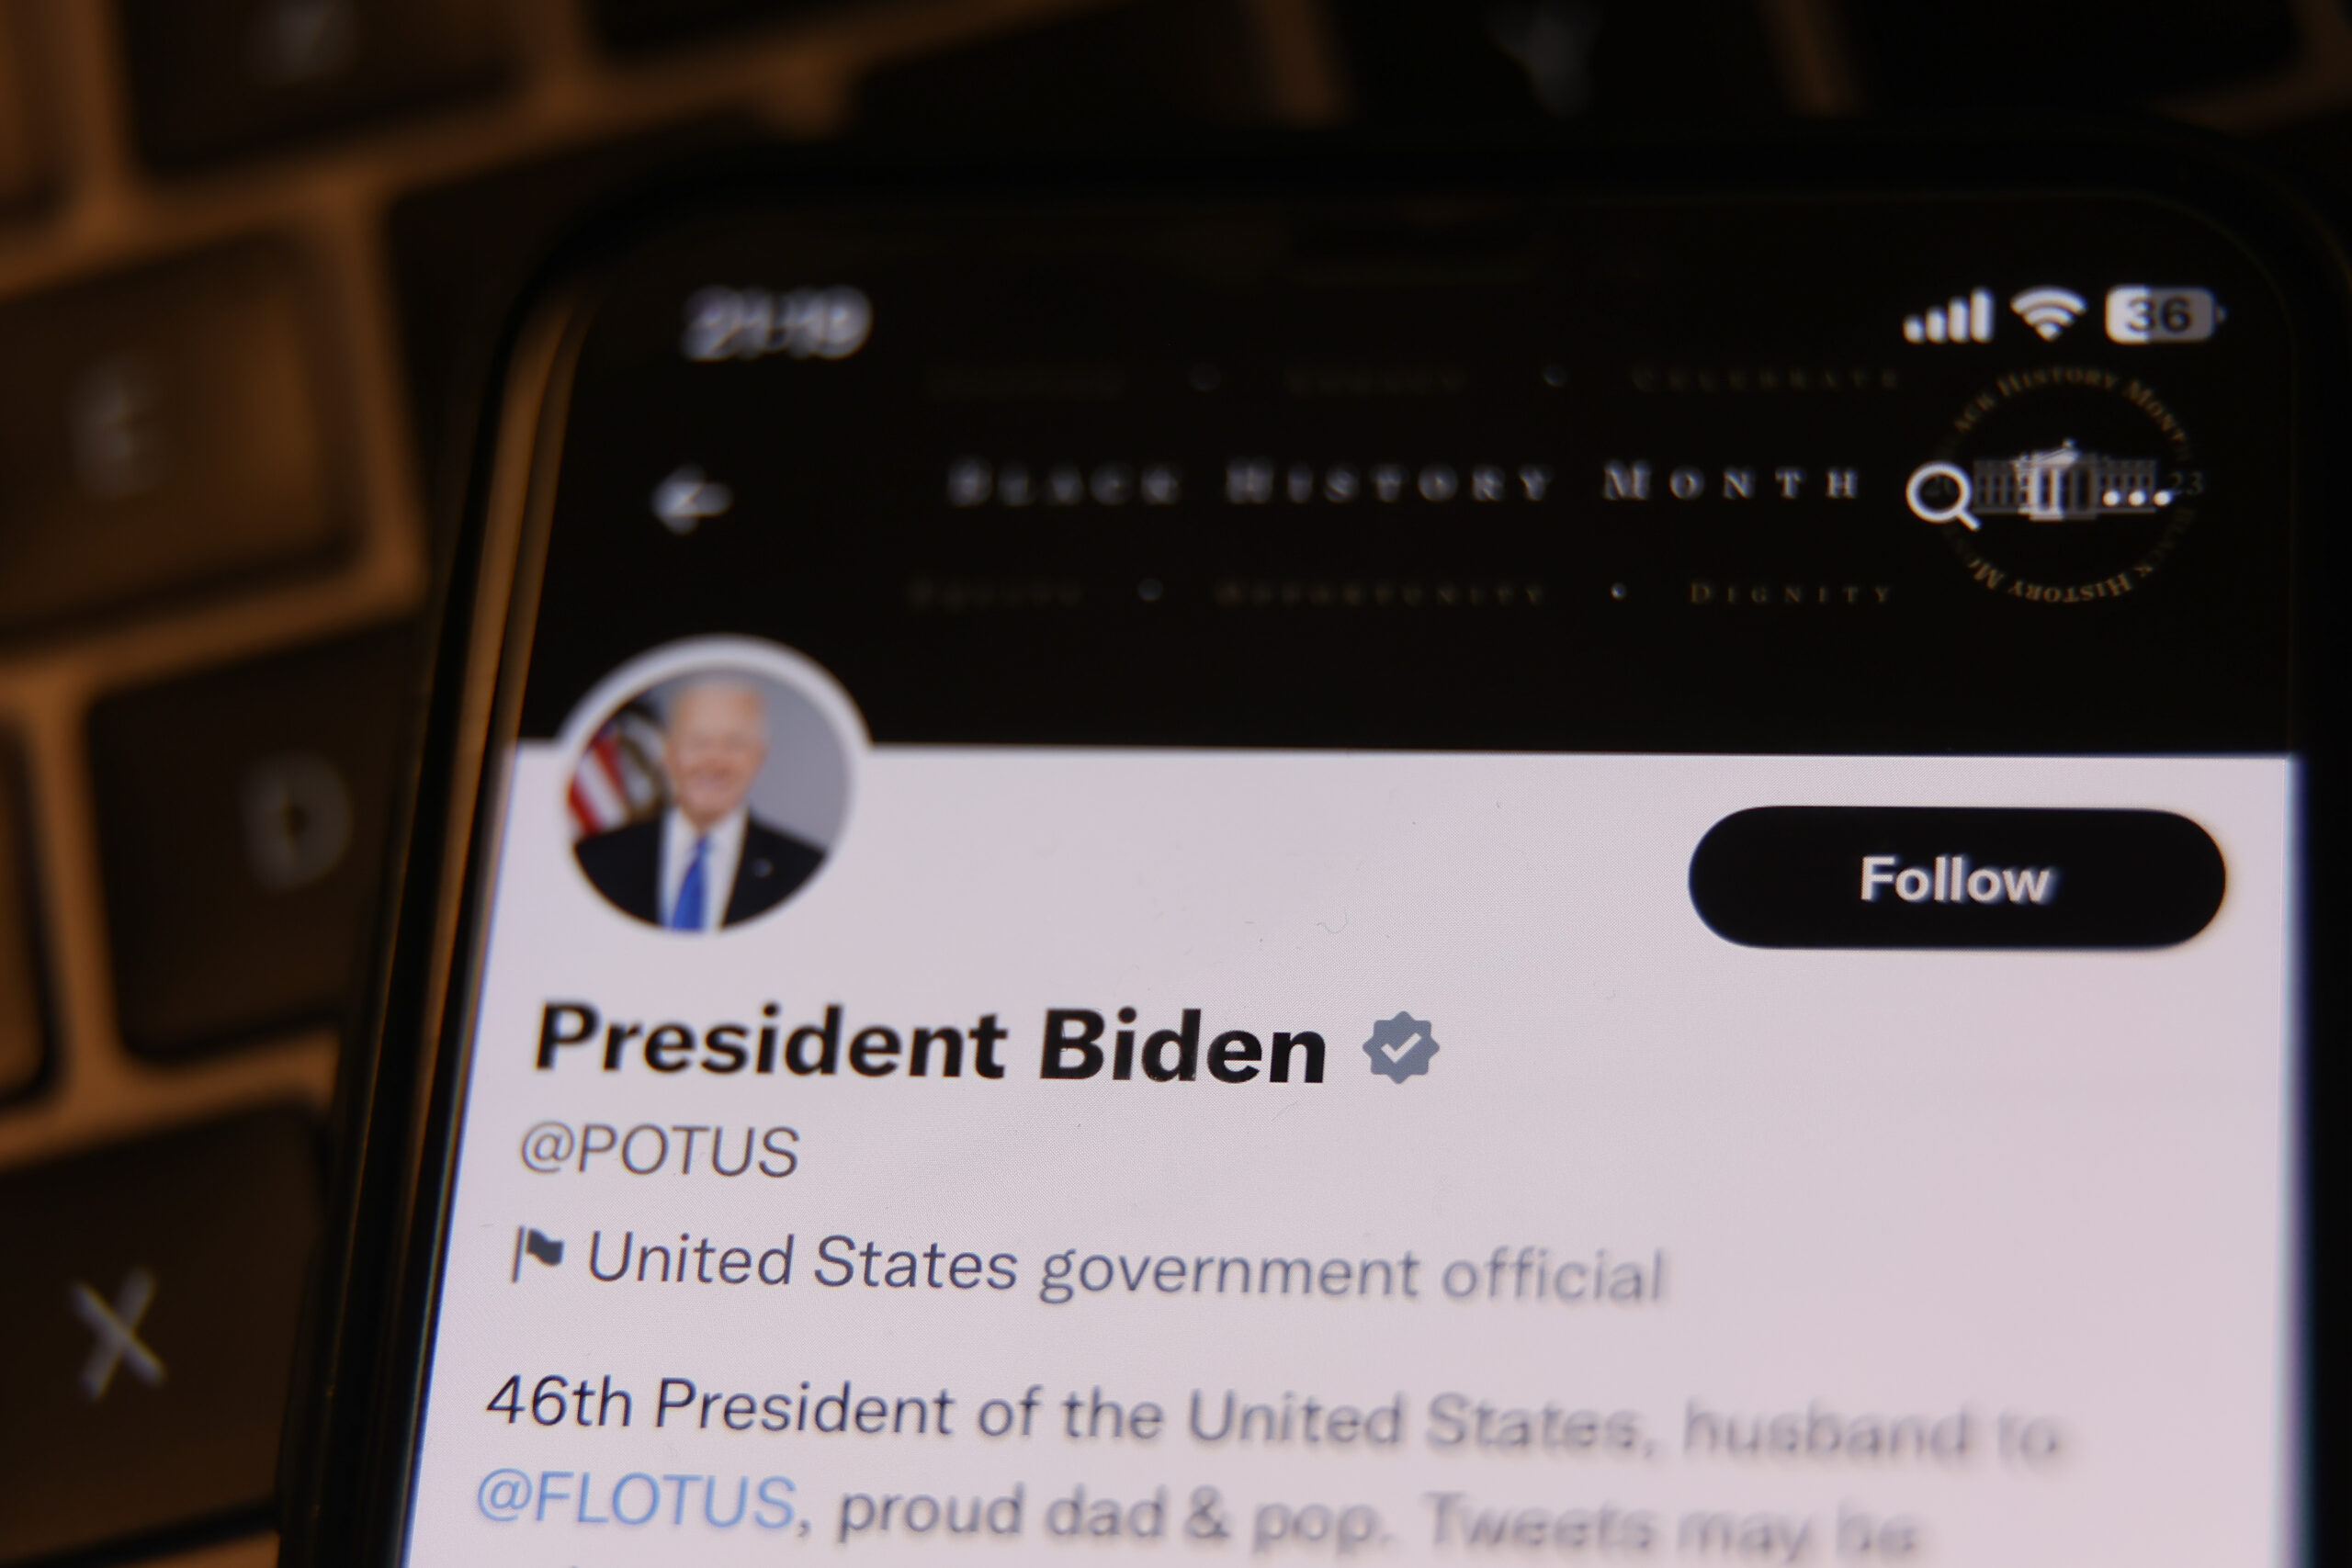 Hundreds Of Social Media ‘Influencers’ To Tout Biden’s Record Ahead Of 2024 Election: Report